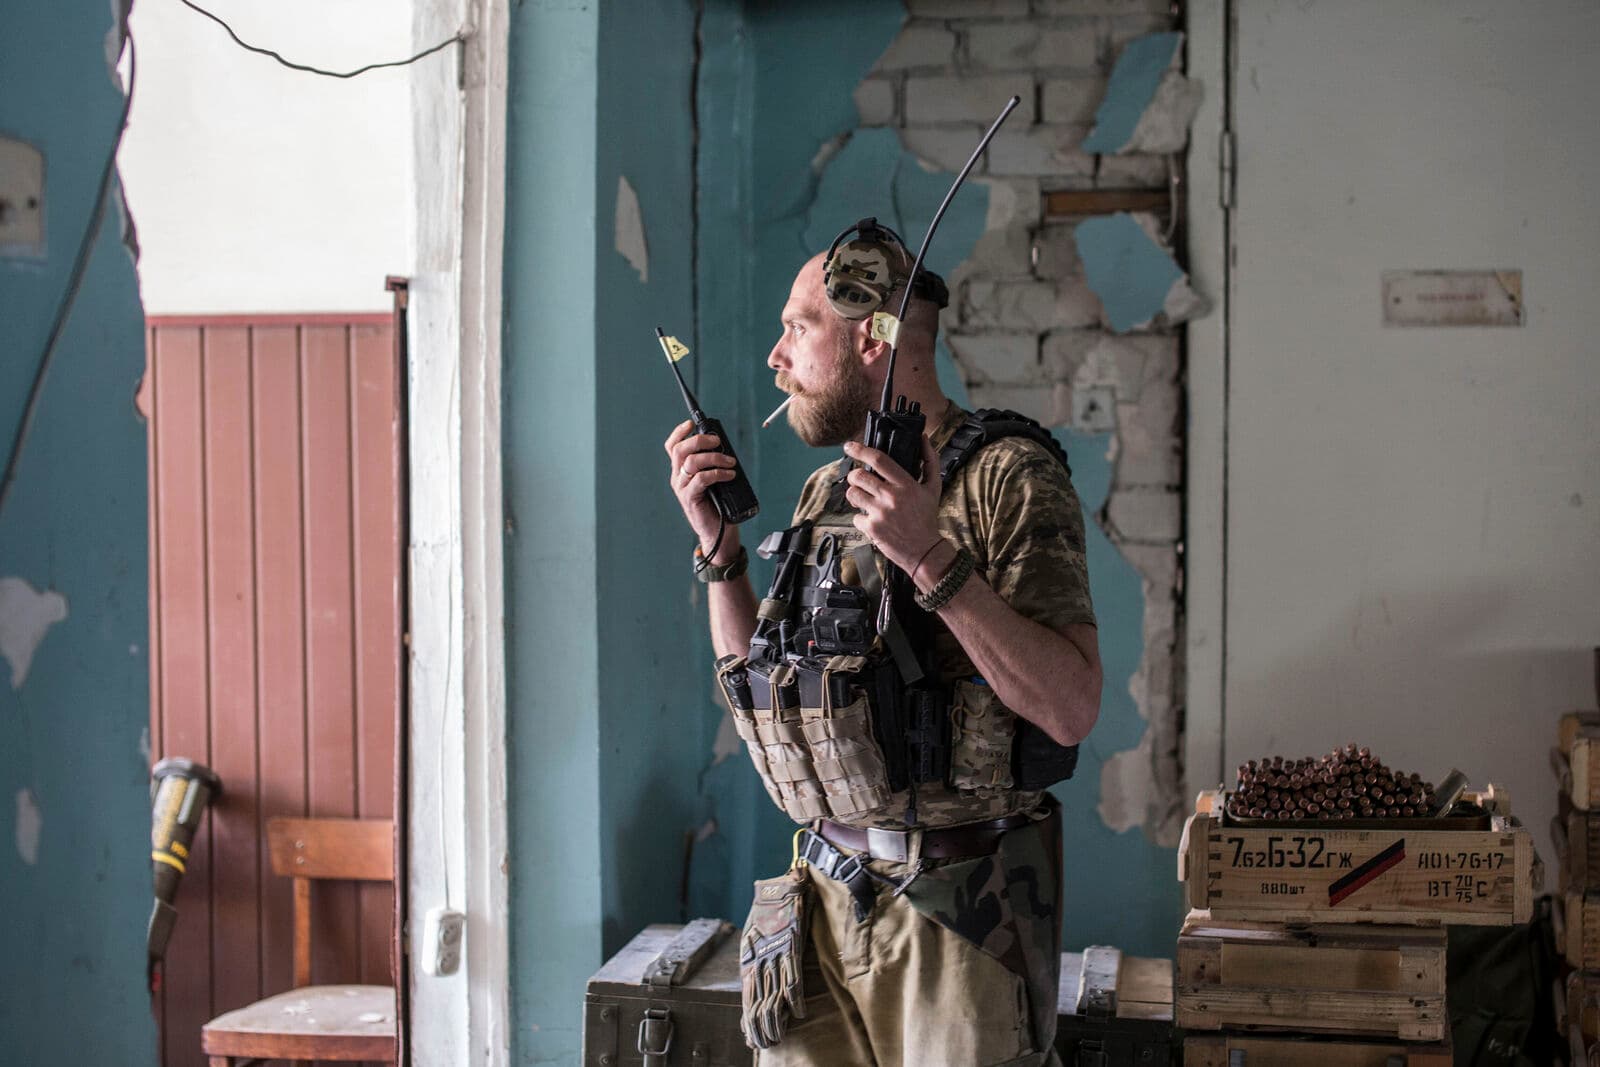 A Ukrainian soldier holds radios during heavy fighting on the front line in Severodonetsk